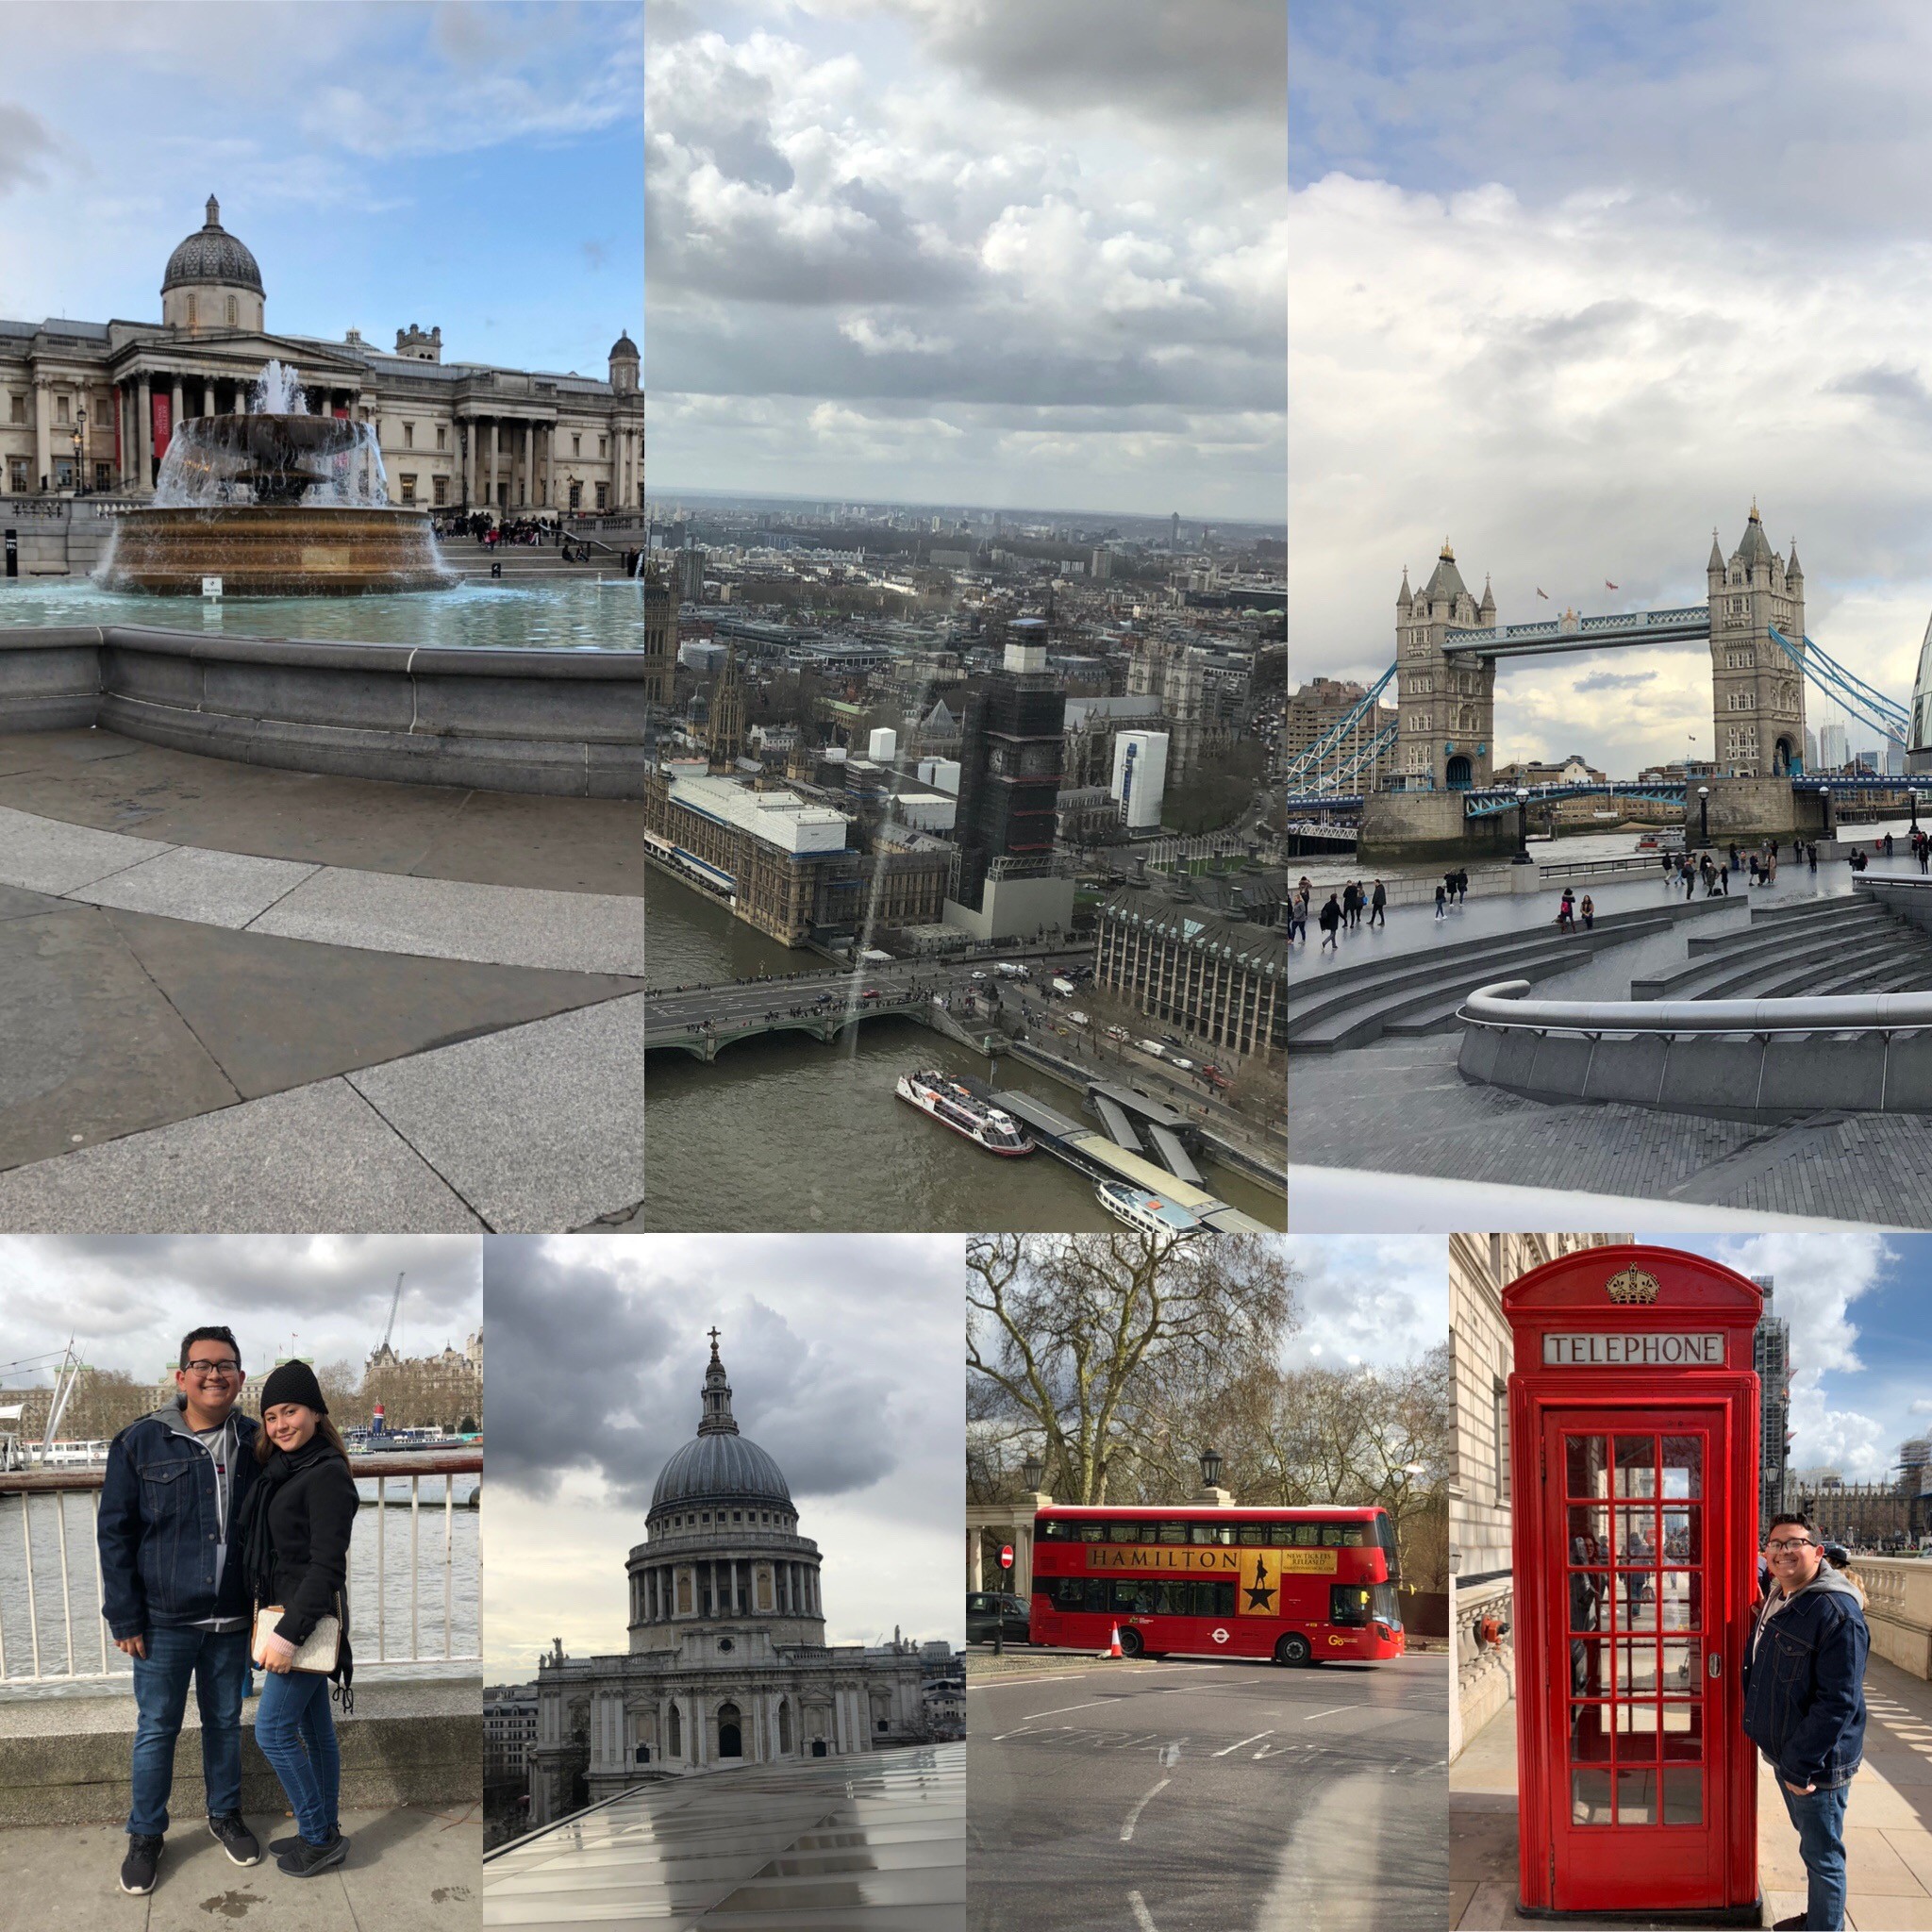 A few highlights from my London trip.